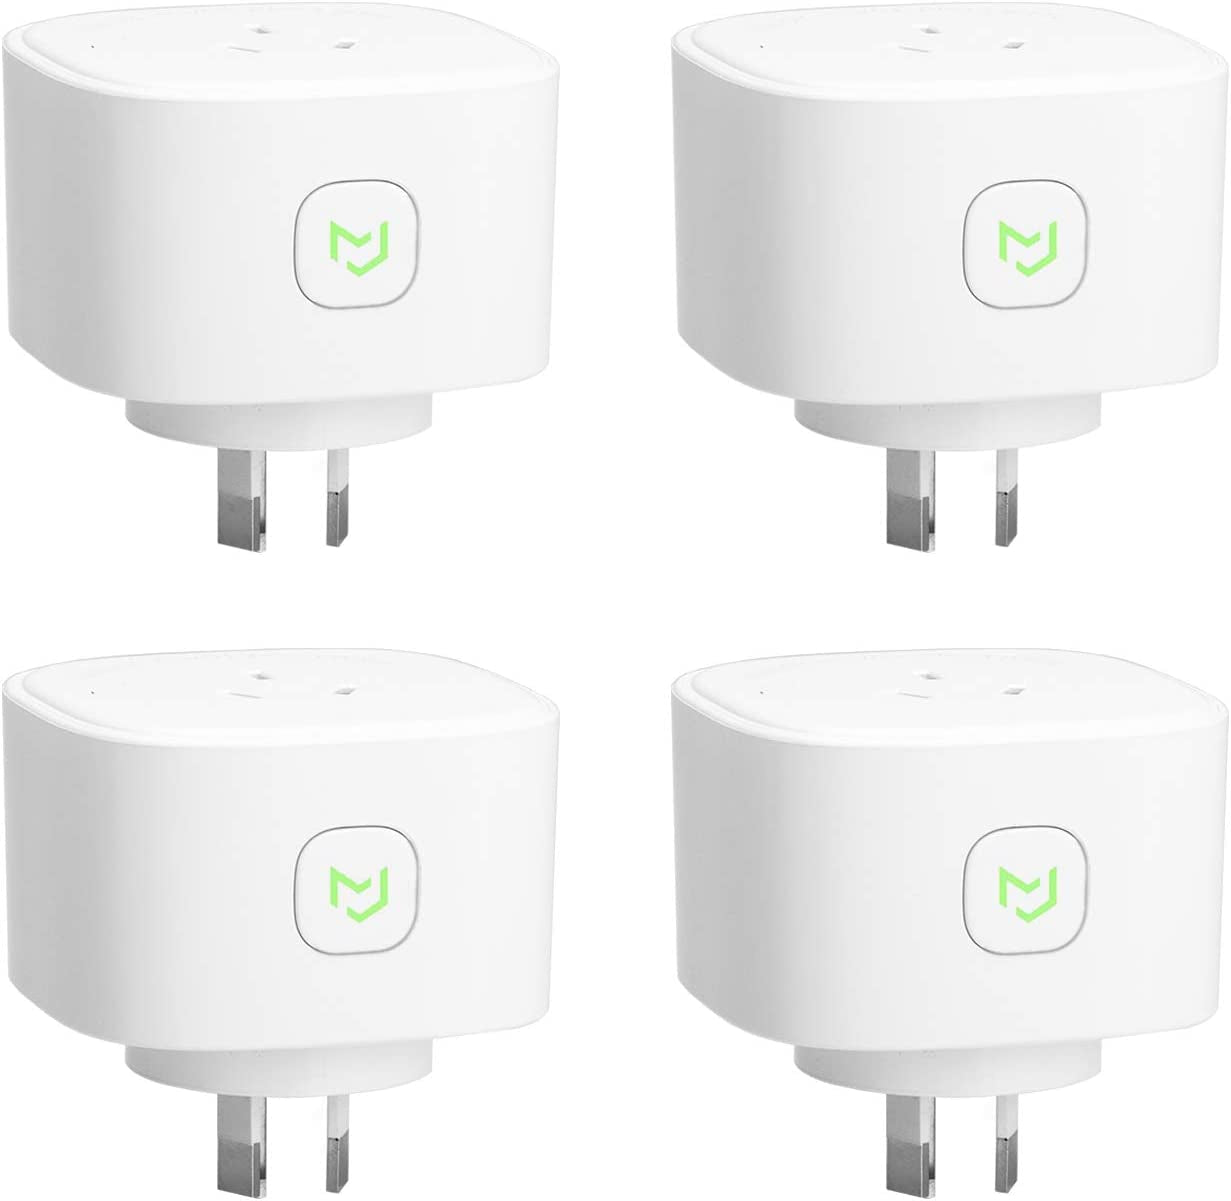 meross, Meross Smart Plug Wifi Outlet with Energy Monitor, App Remote Control, Timing Function, Compatible with Alexa, Google Assistant, Smartthings, SAA & RCM Certified - 4 Pack